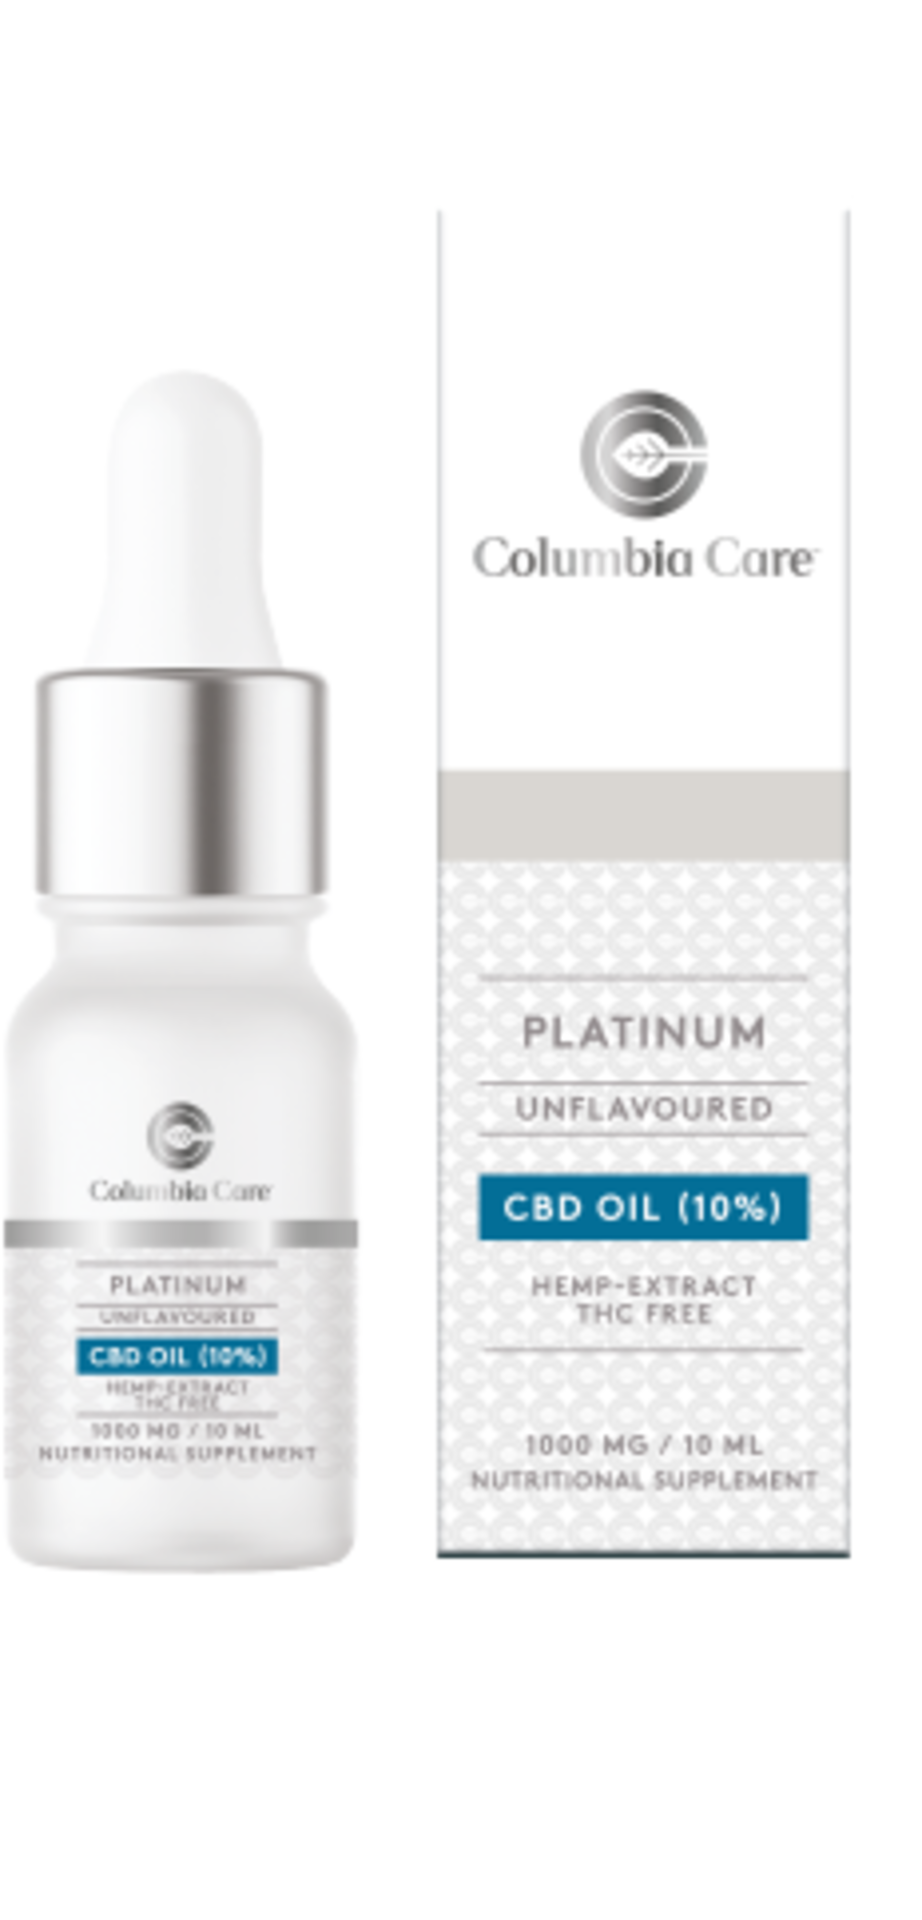 50 x Brand New Columbia Care Platinum oils in various flavours and mg 10ml. Columbia Care, a leading